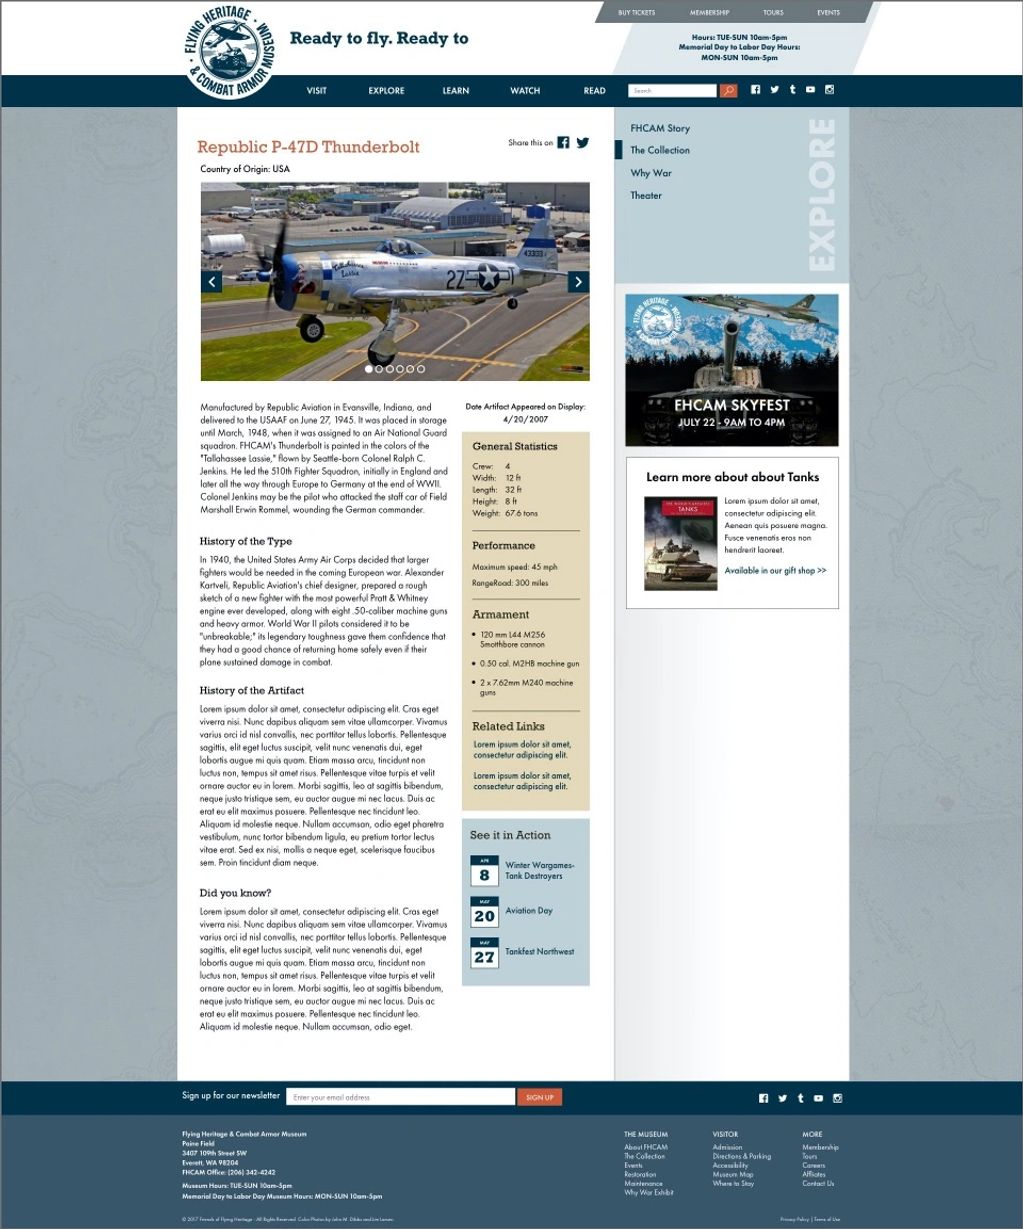 This page shows a large plane photo, text about the plane, general statistics and events.